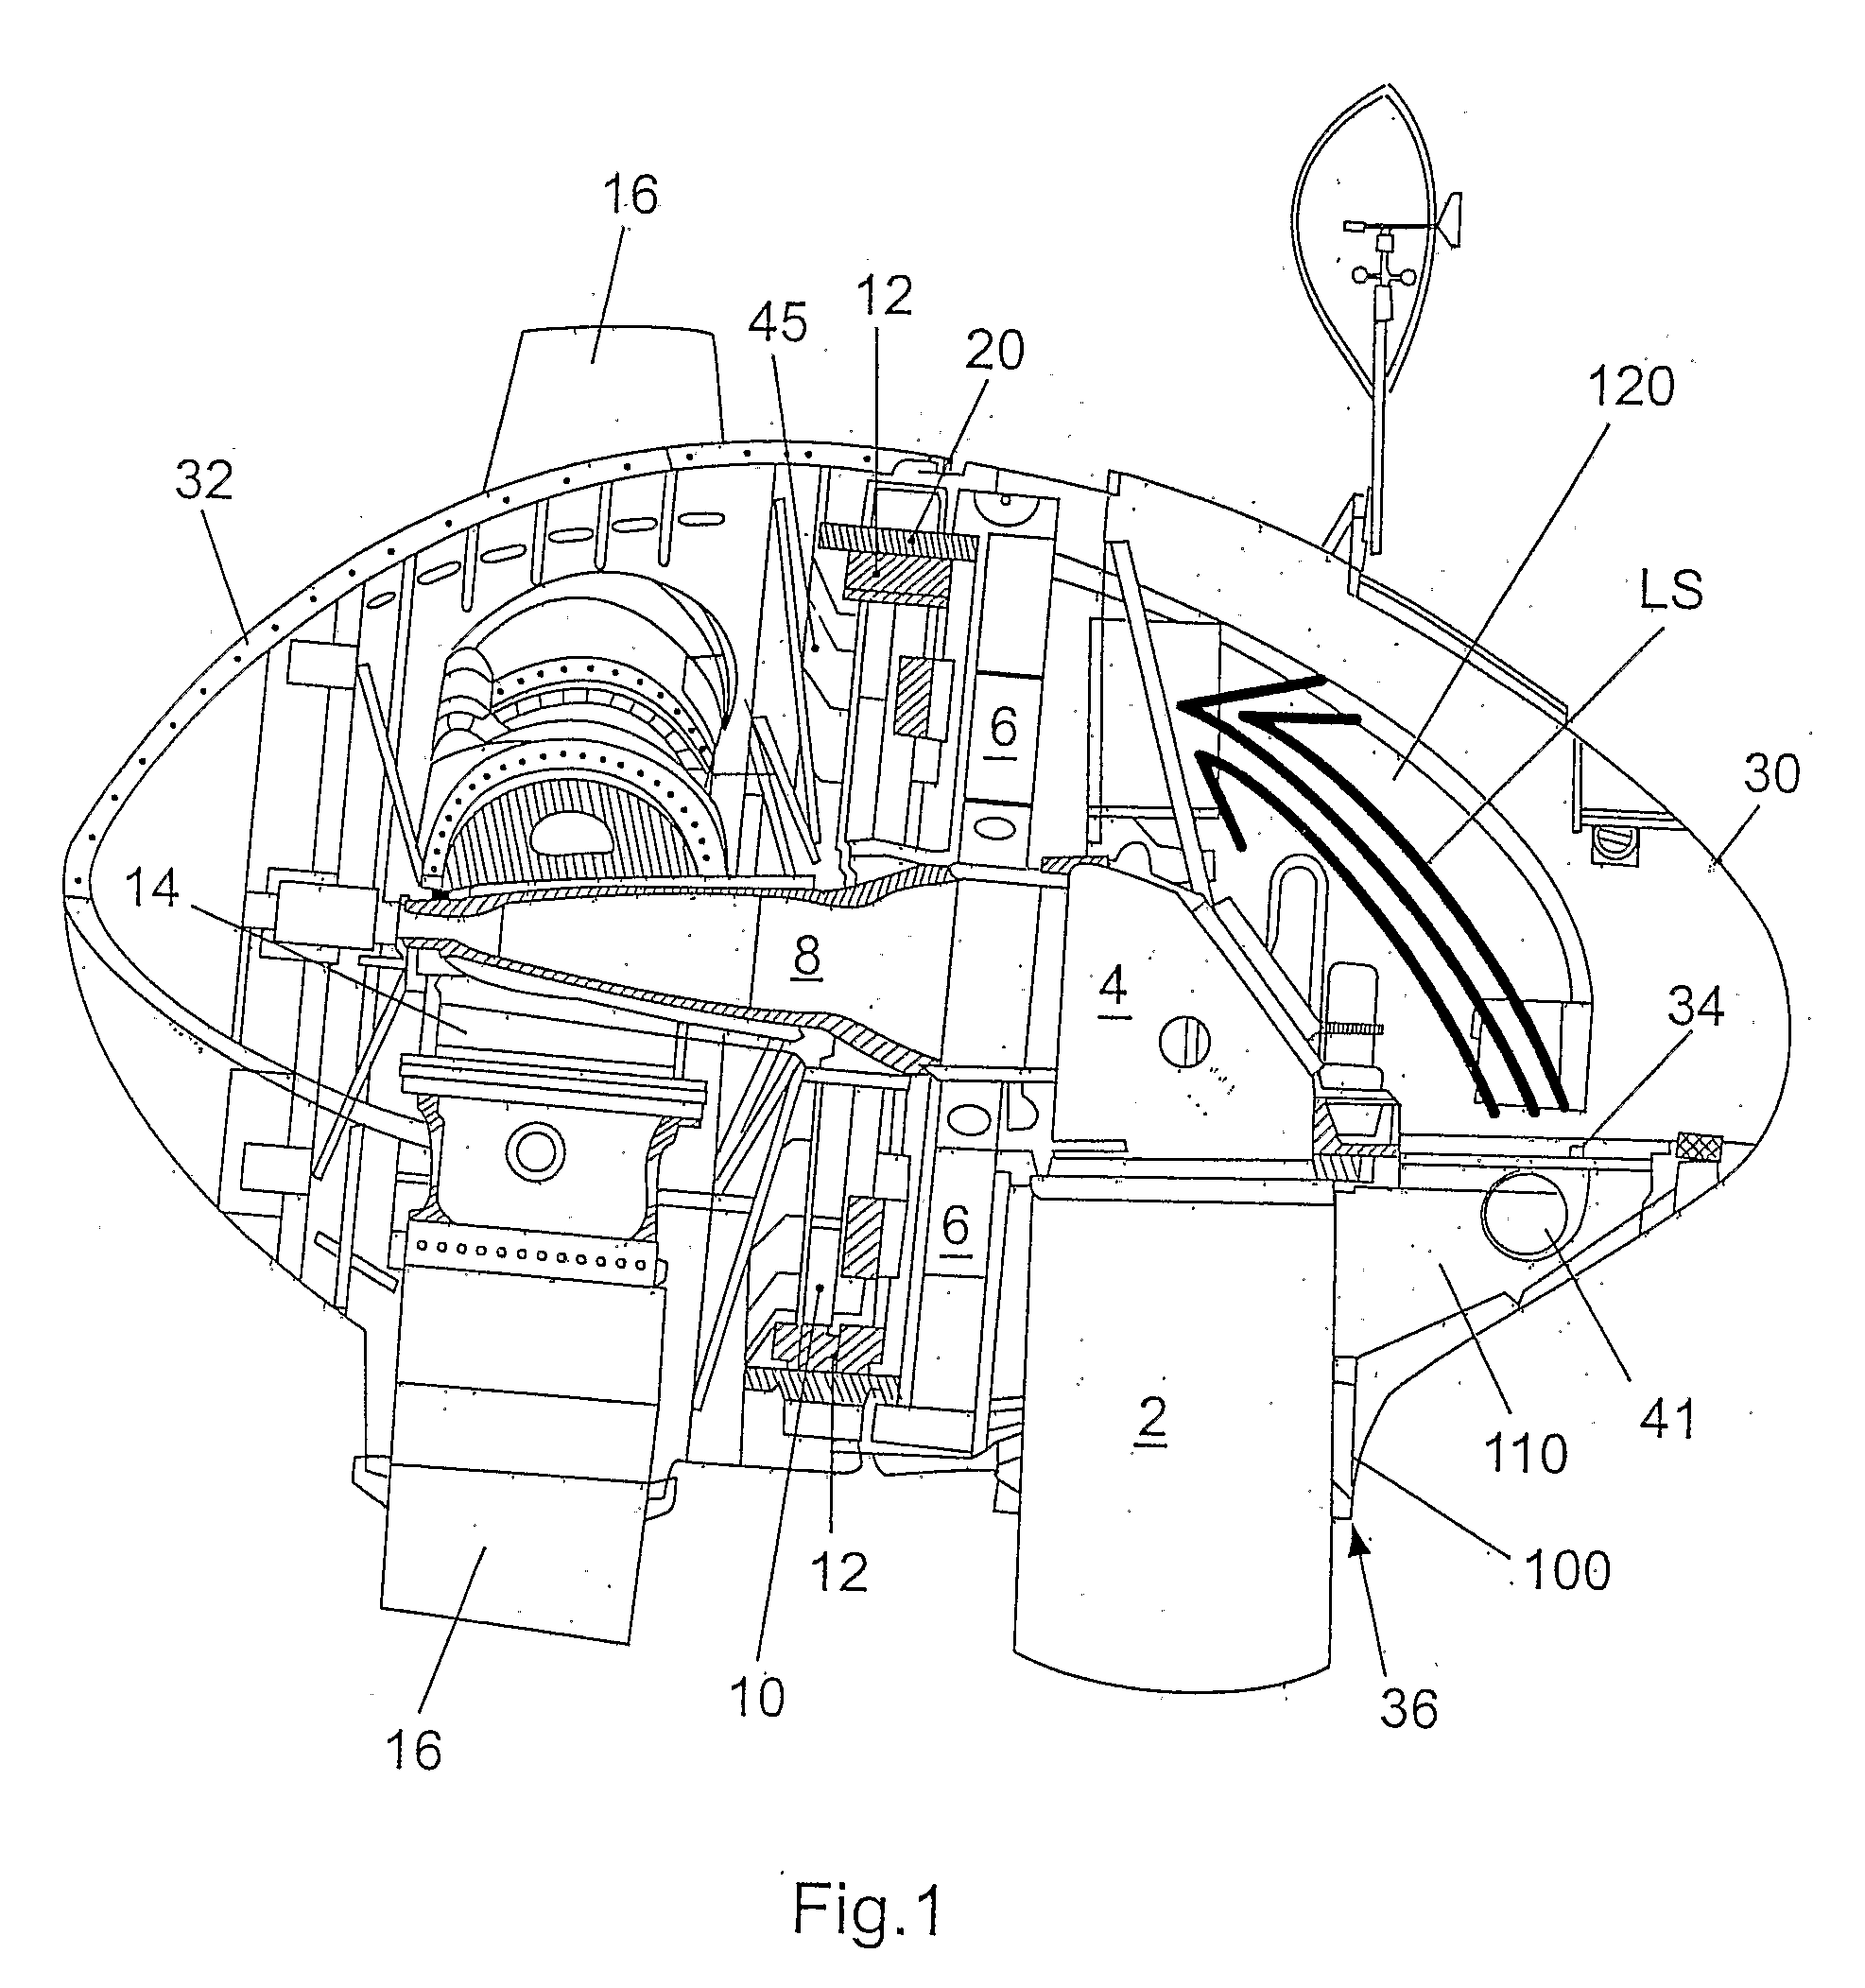 Wind Turbine Comprising a Generator Cooling System